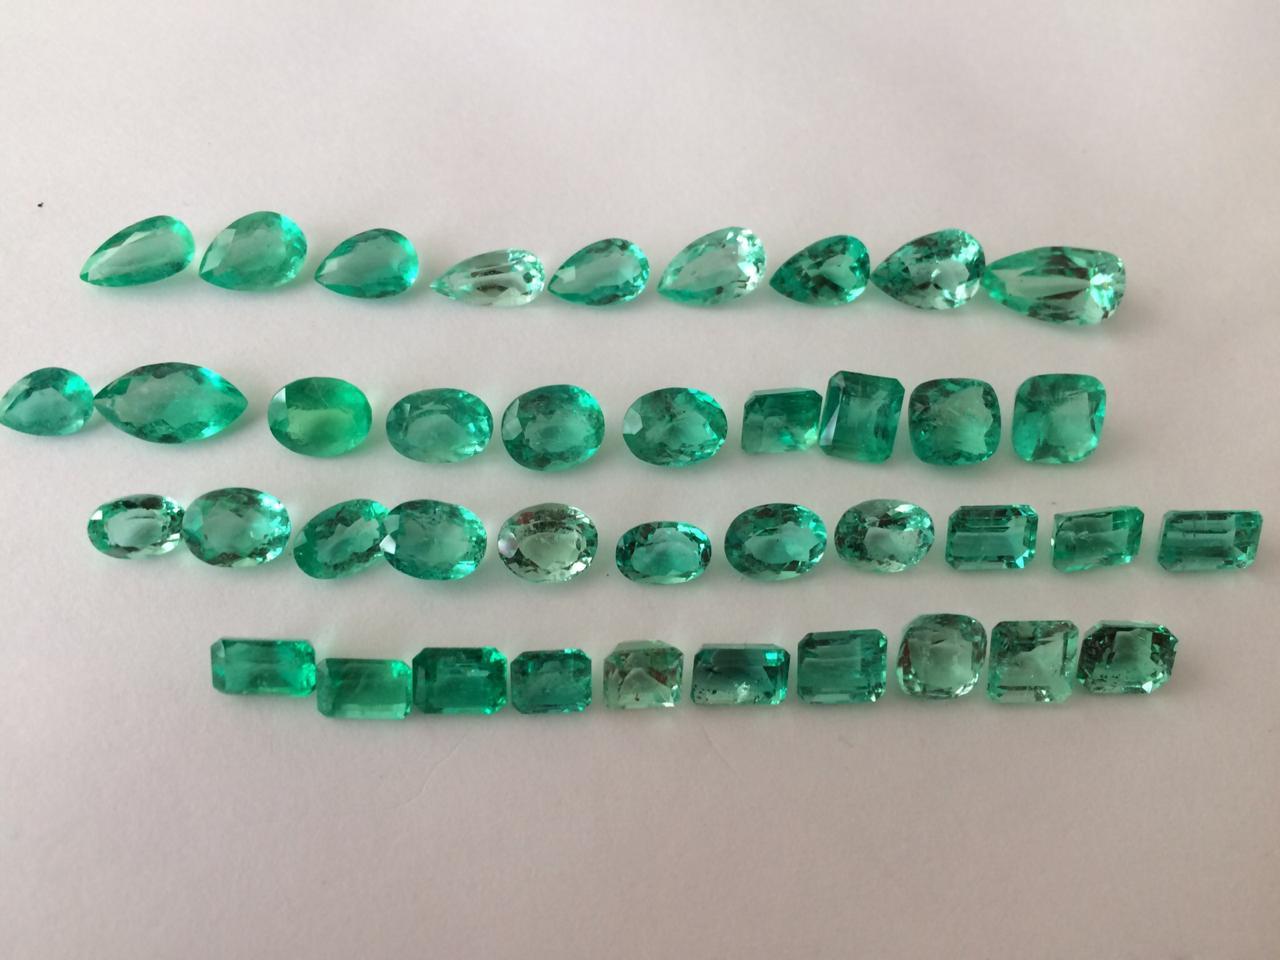 26.95 Ct. Colombian Emerald lot 